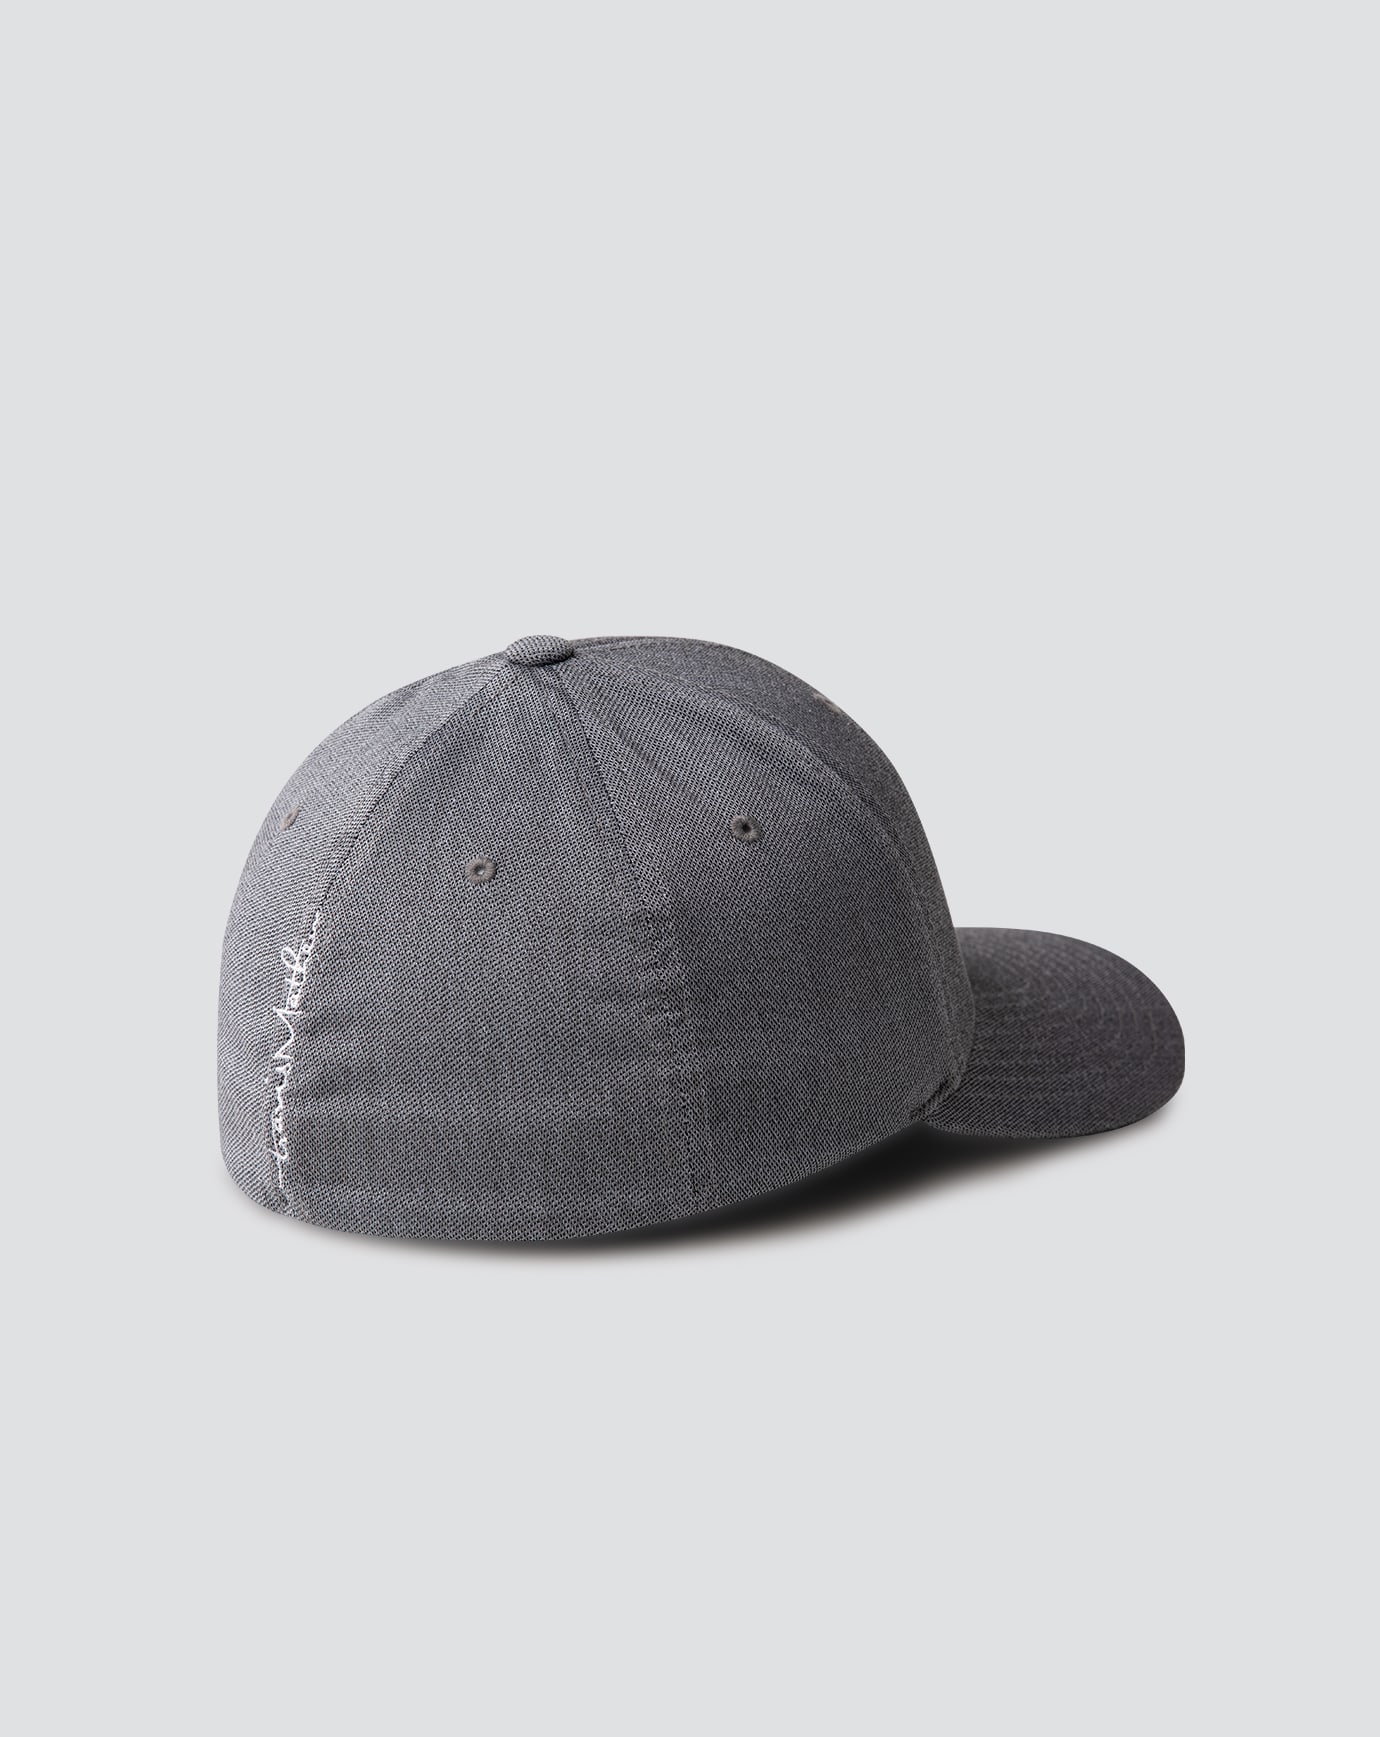 TORTUGA FITTED HAT Image Thumbnail 3